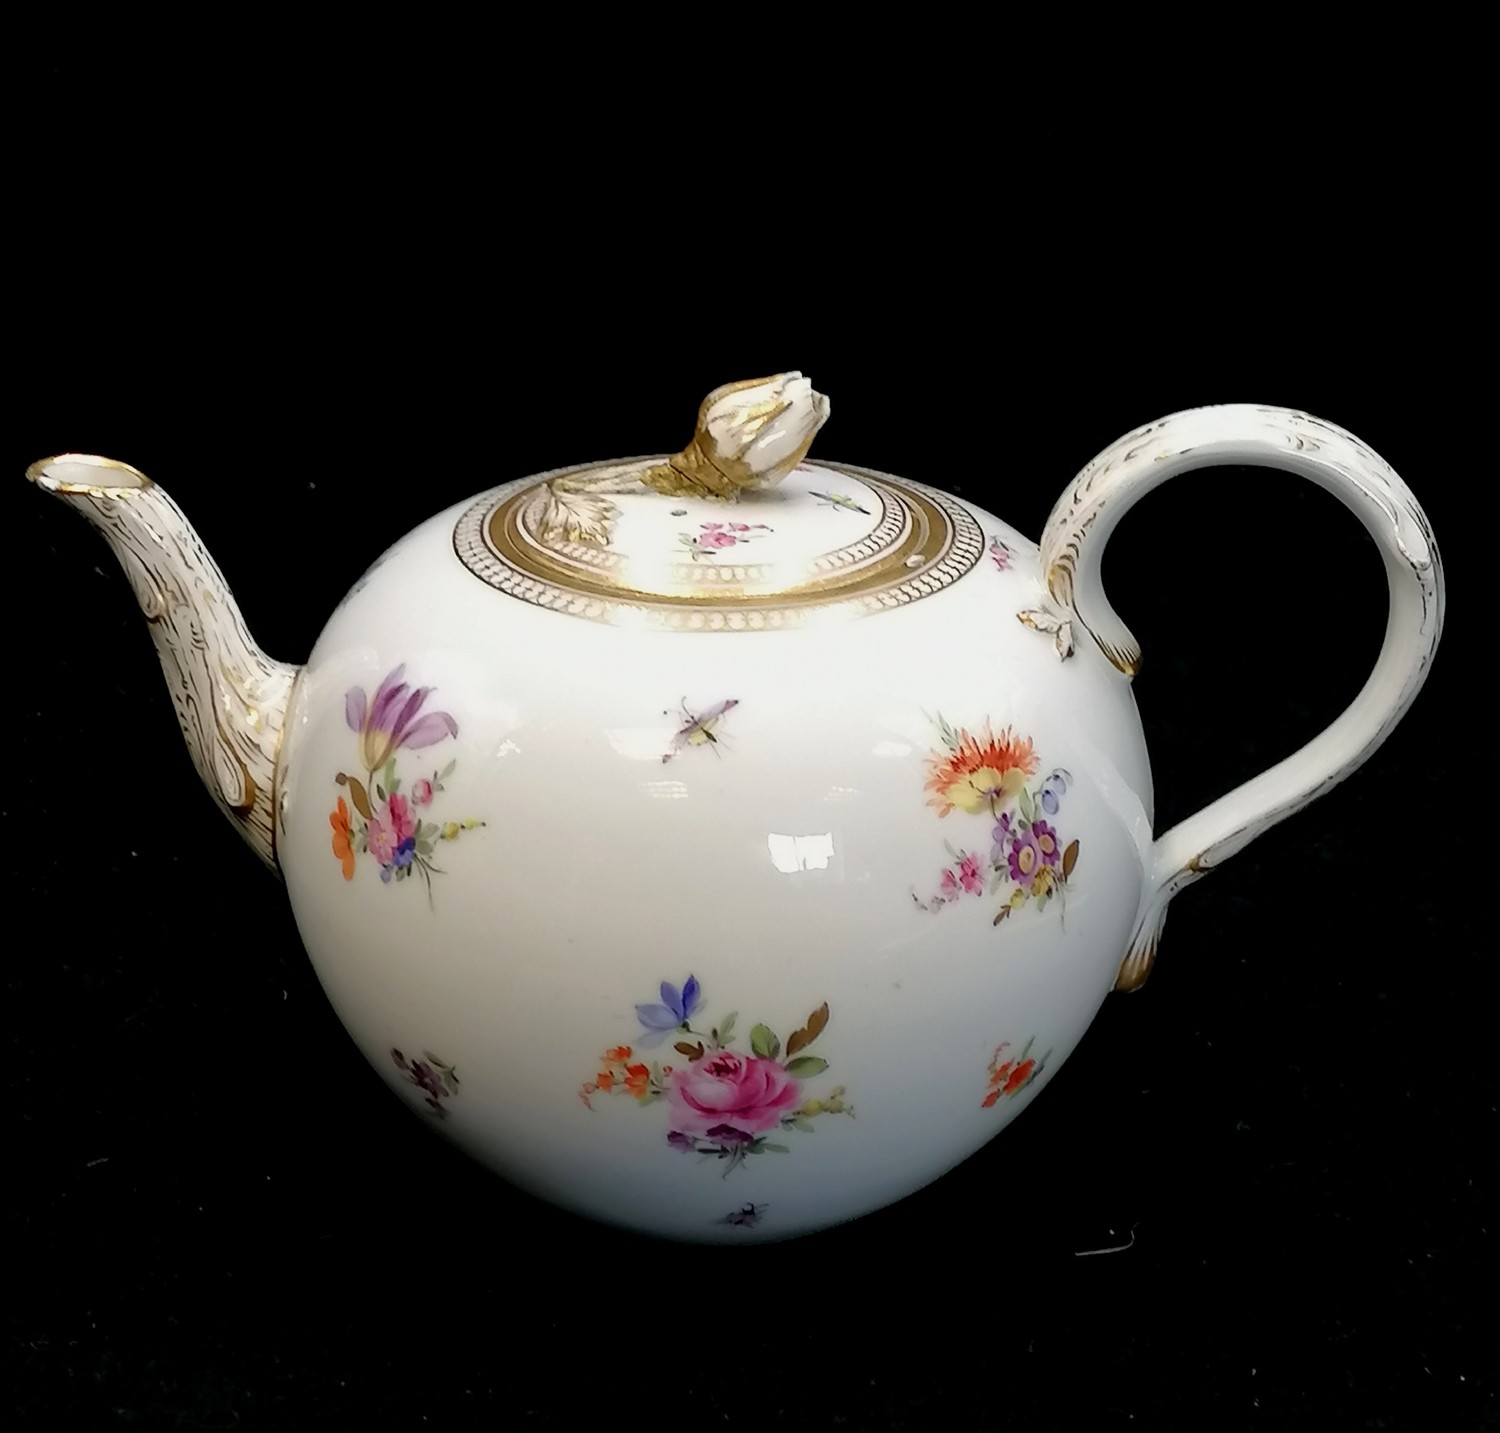 Antique Meissen marked hand decorated teapot with flower & bug decoration - small chip & rub to